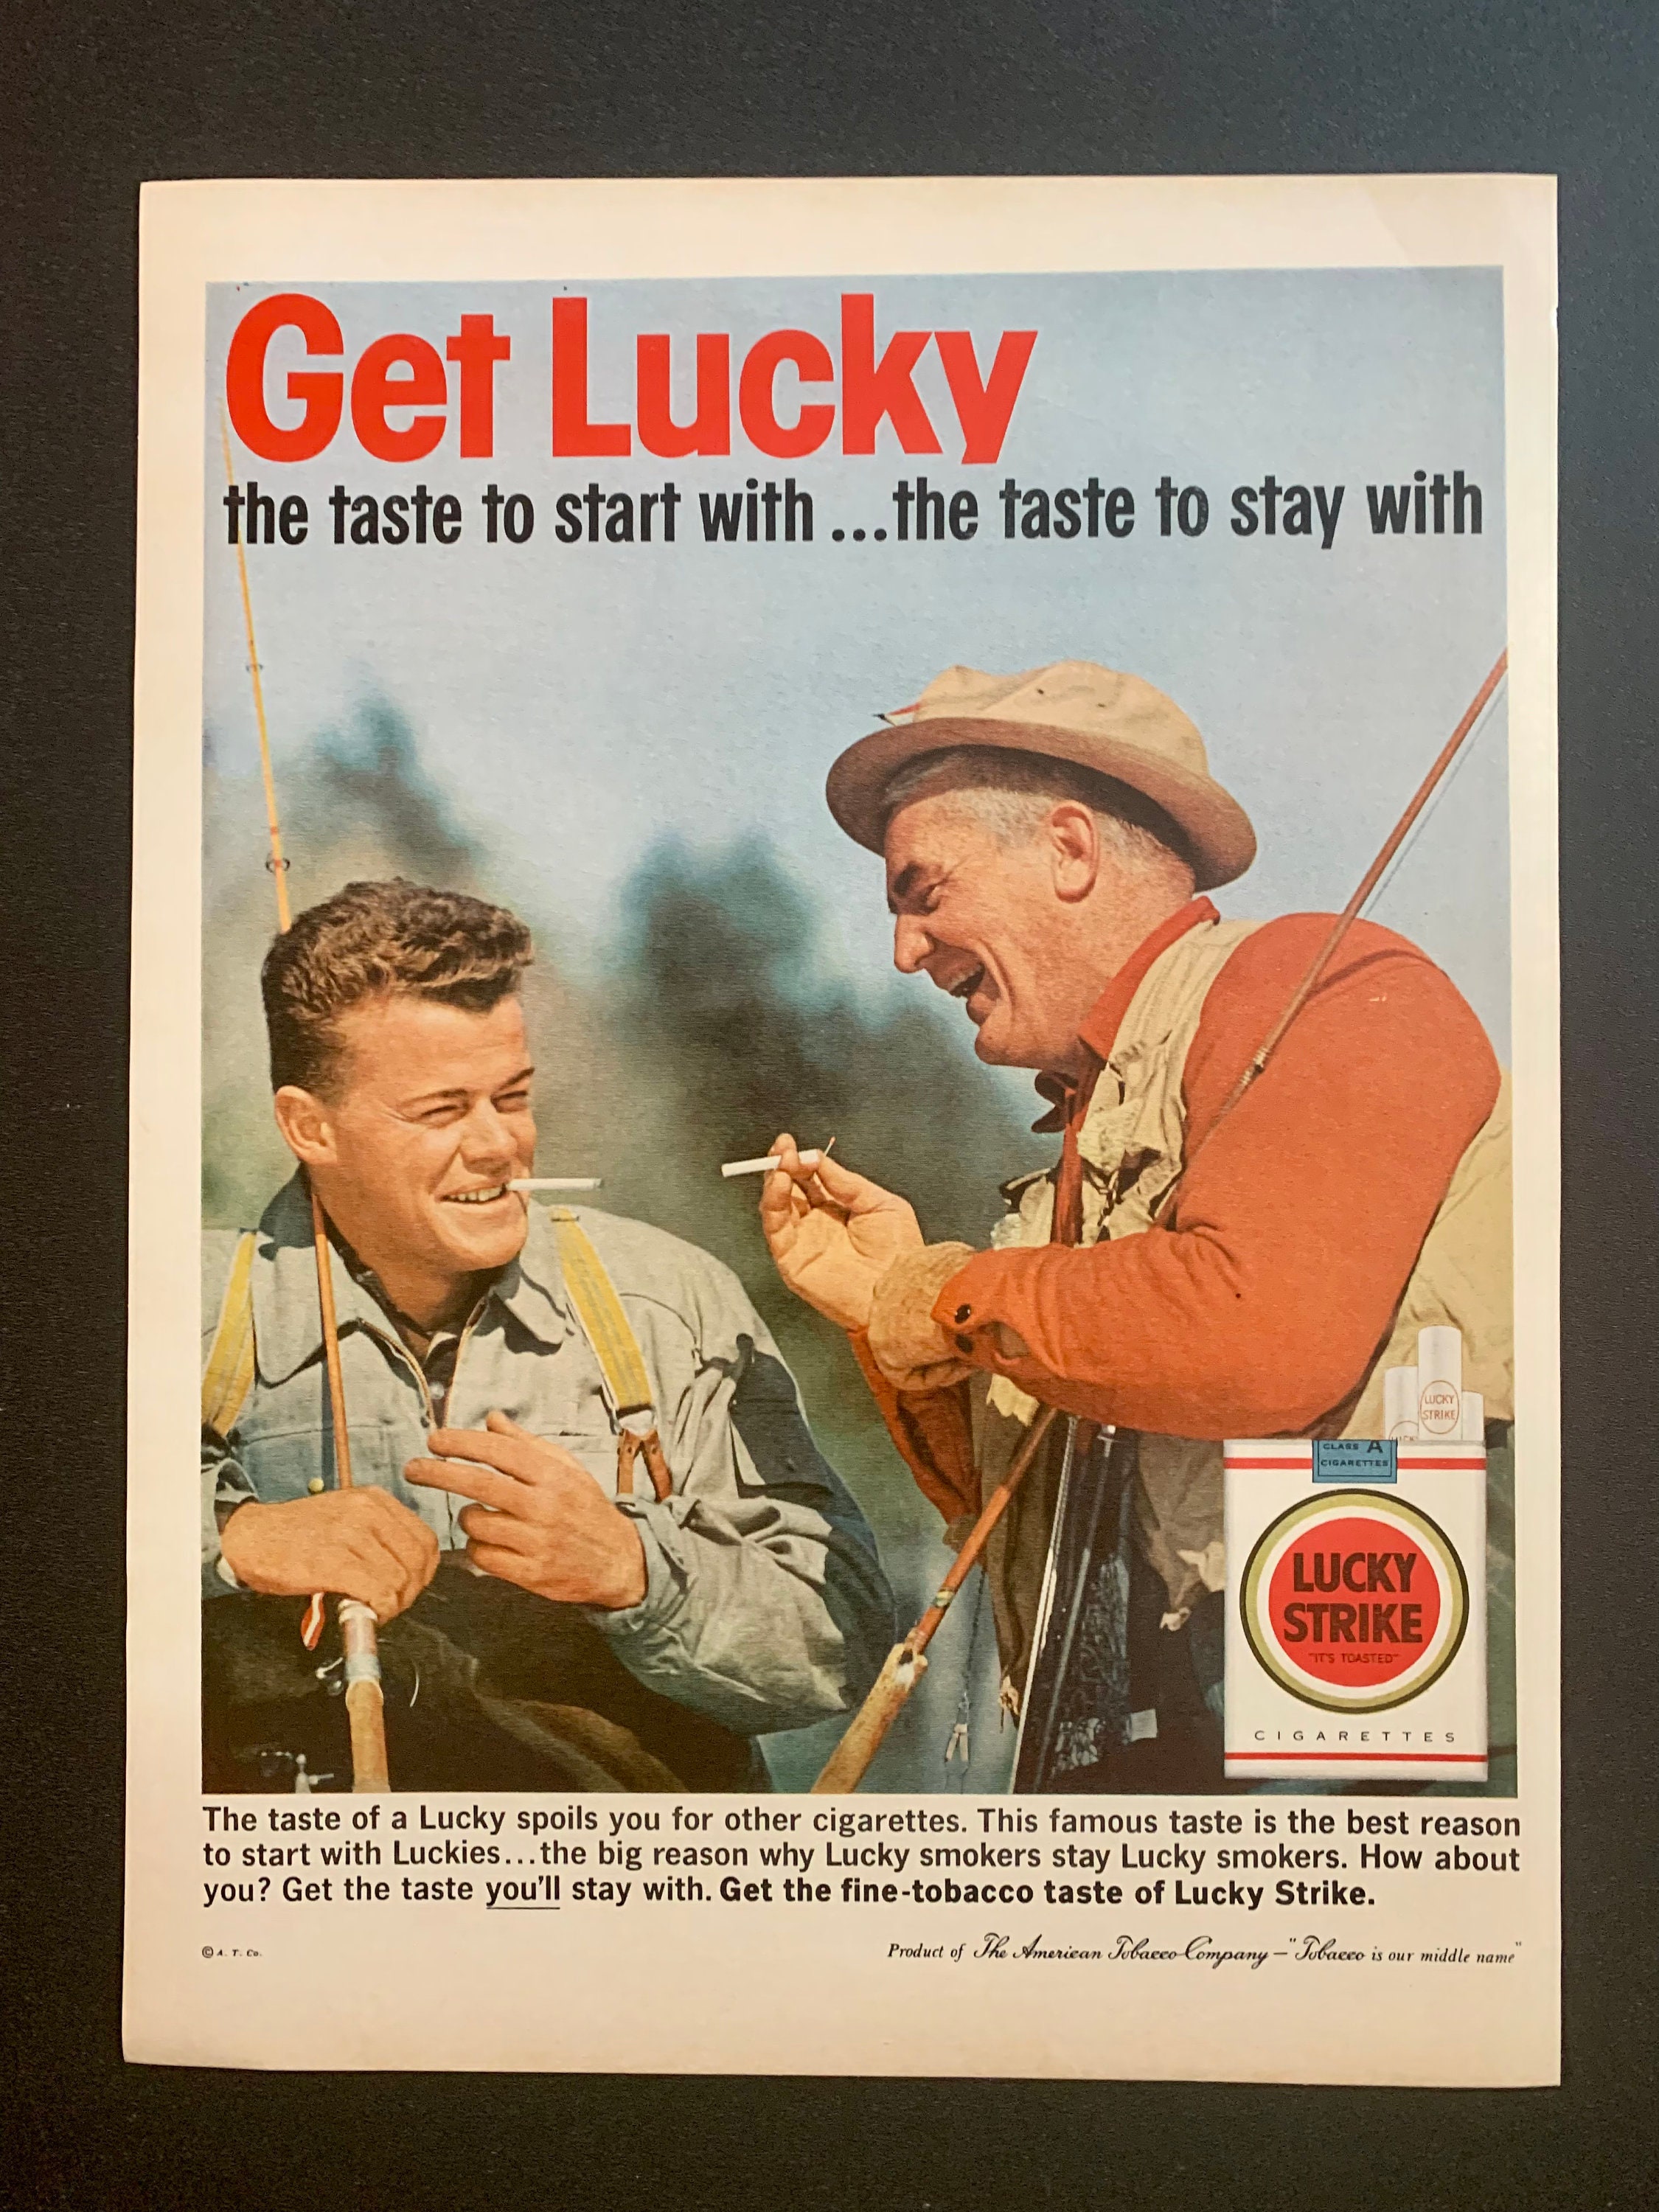 Vintage Lucky Strike Cigarettes Ads Several Styles 1950s and 1960s Retro  Smoking Advertisements Magazine Print Advertising Poster -  Canada